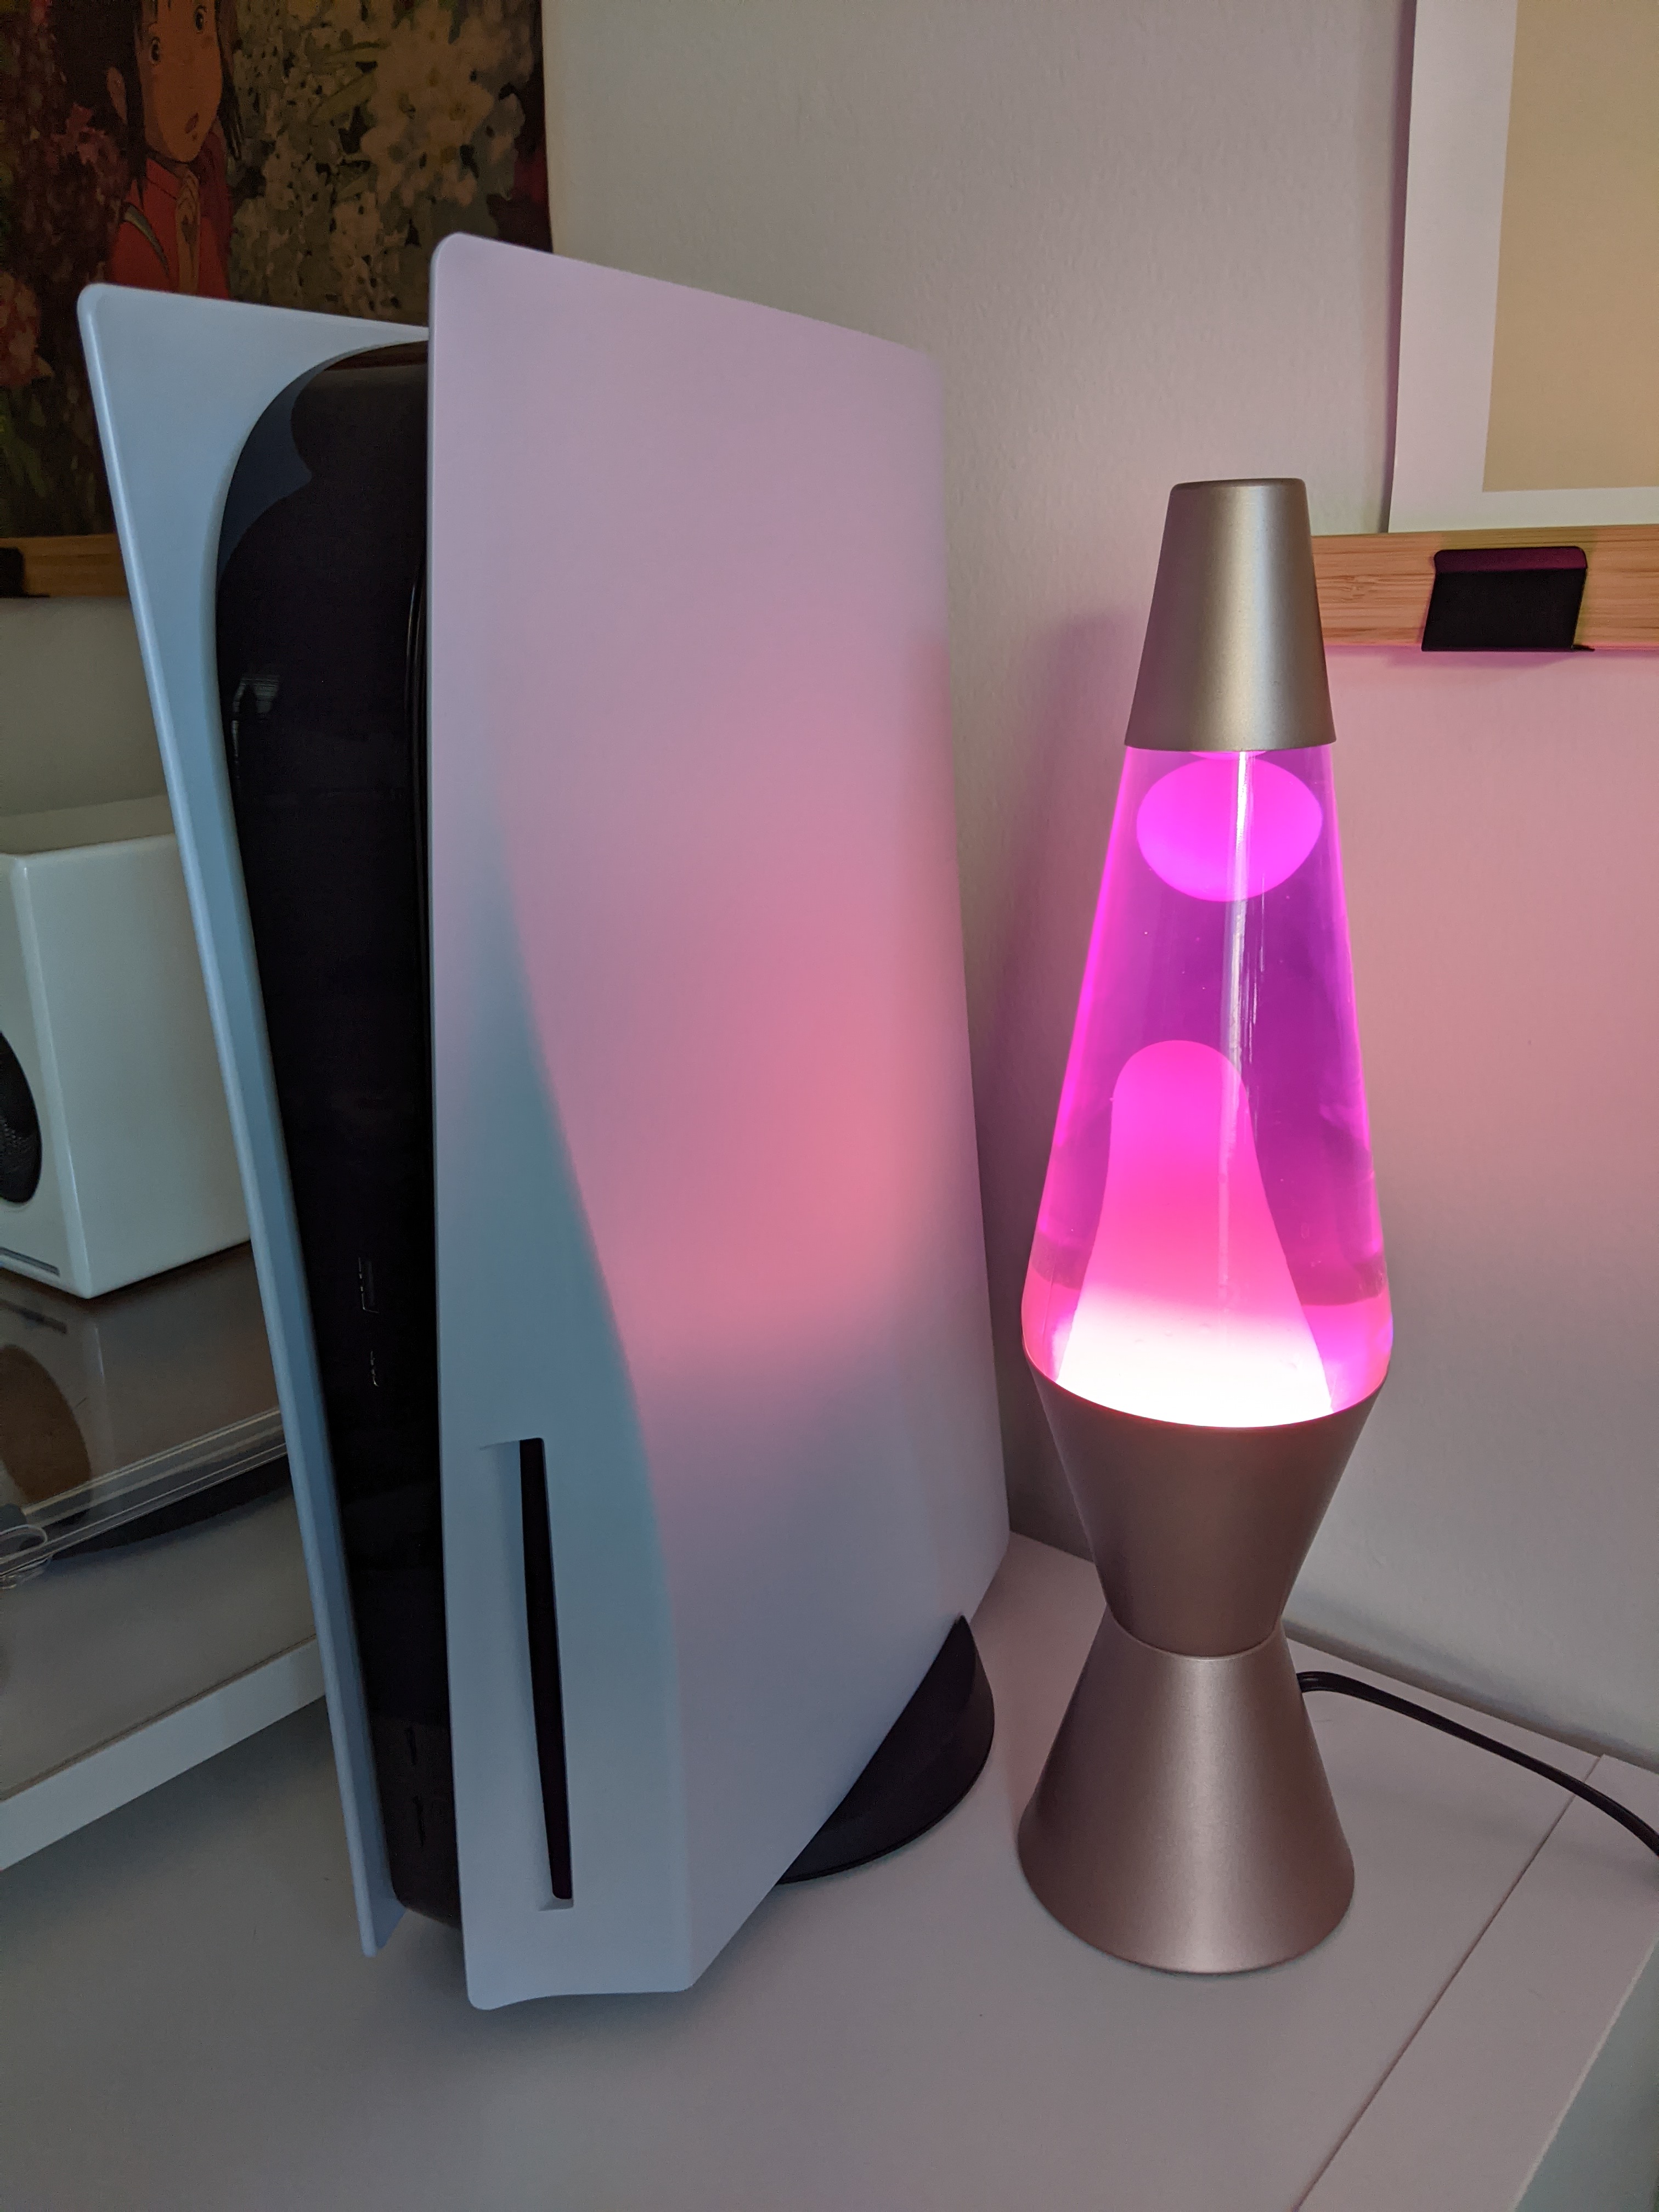 PS5 Next to a Lava Lamp